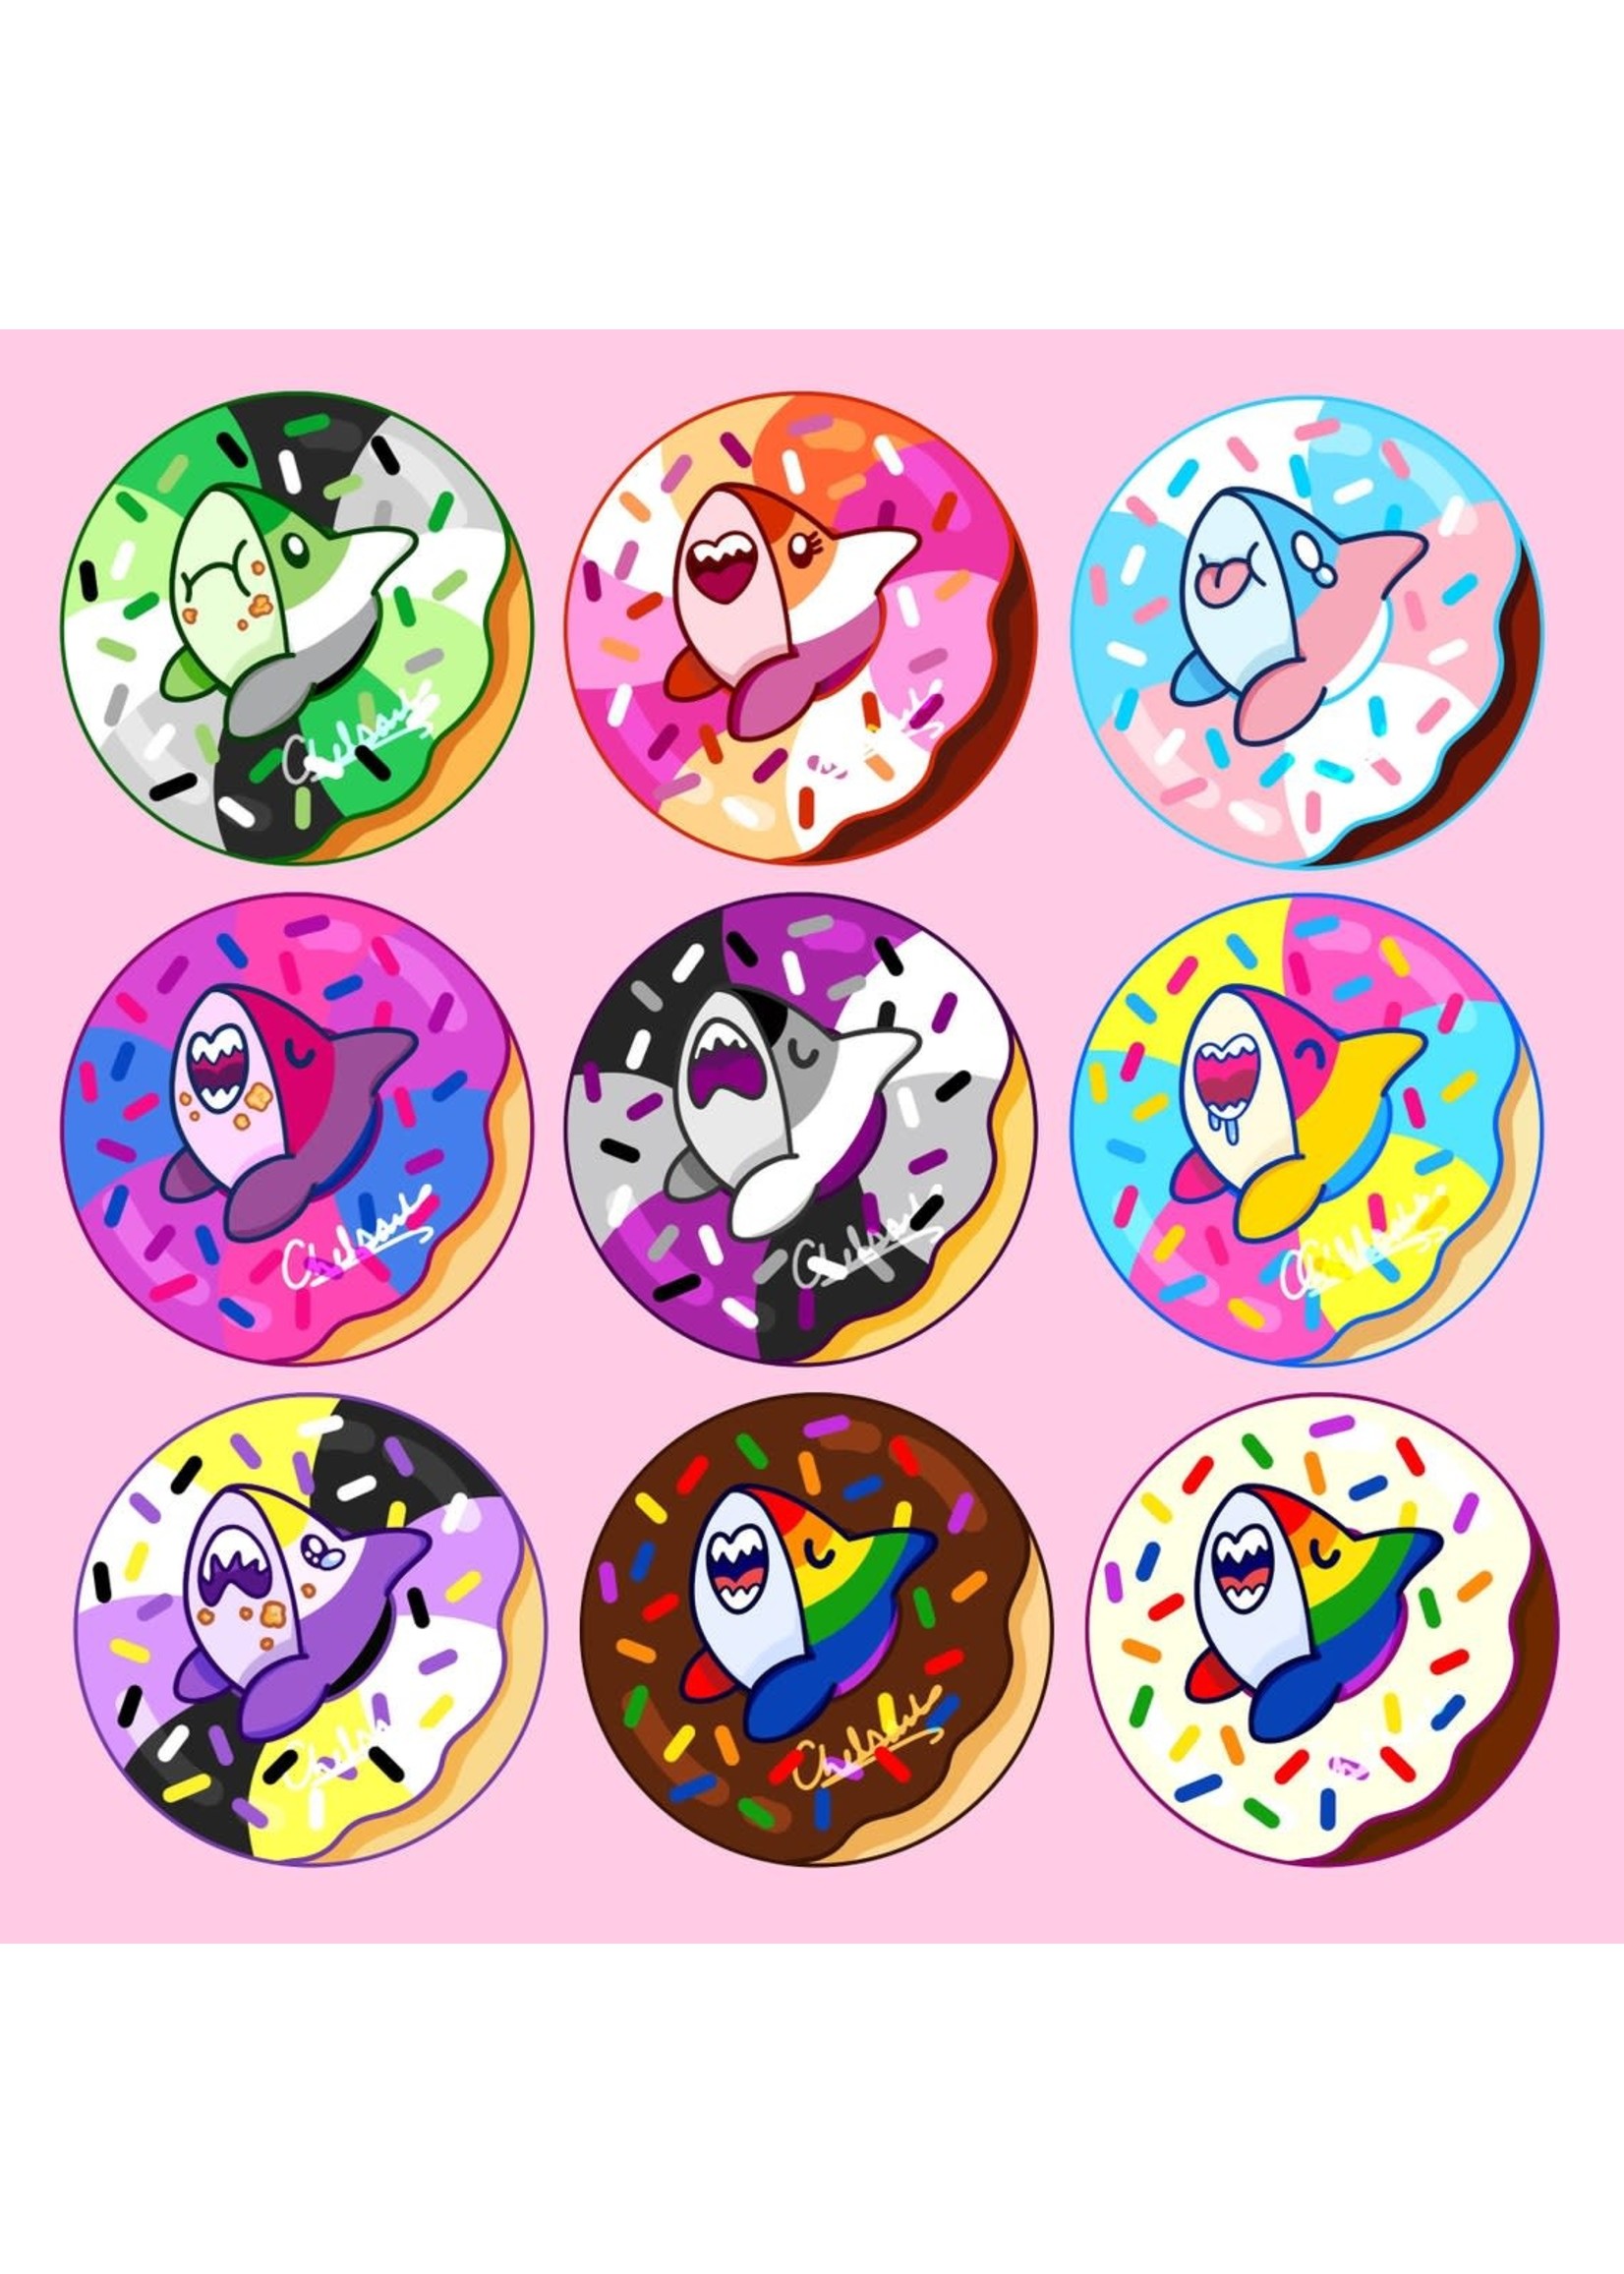 SHARKNDONUTS Pride Sharks and Donut Buttons Lesbian